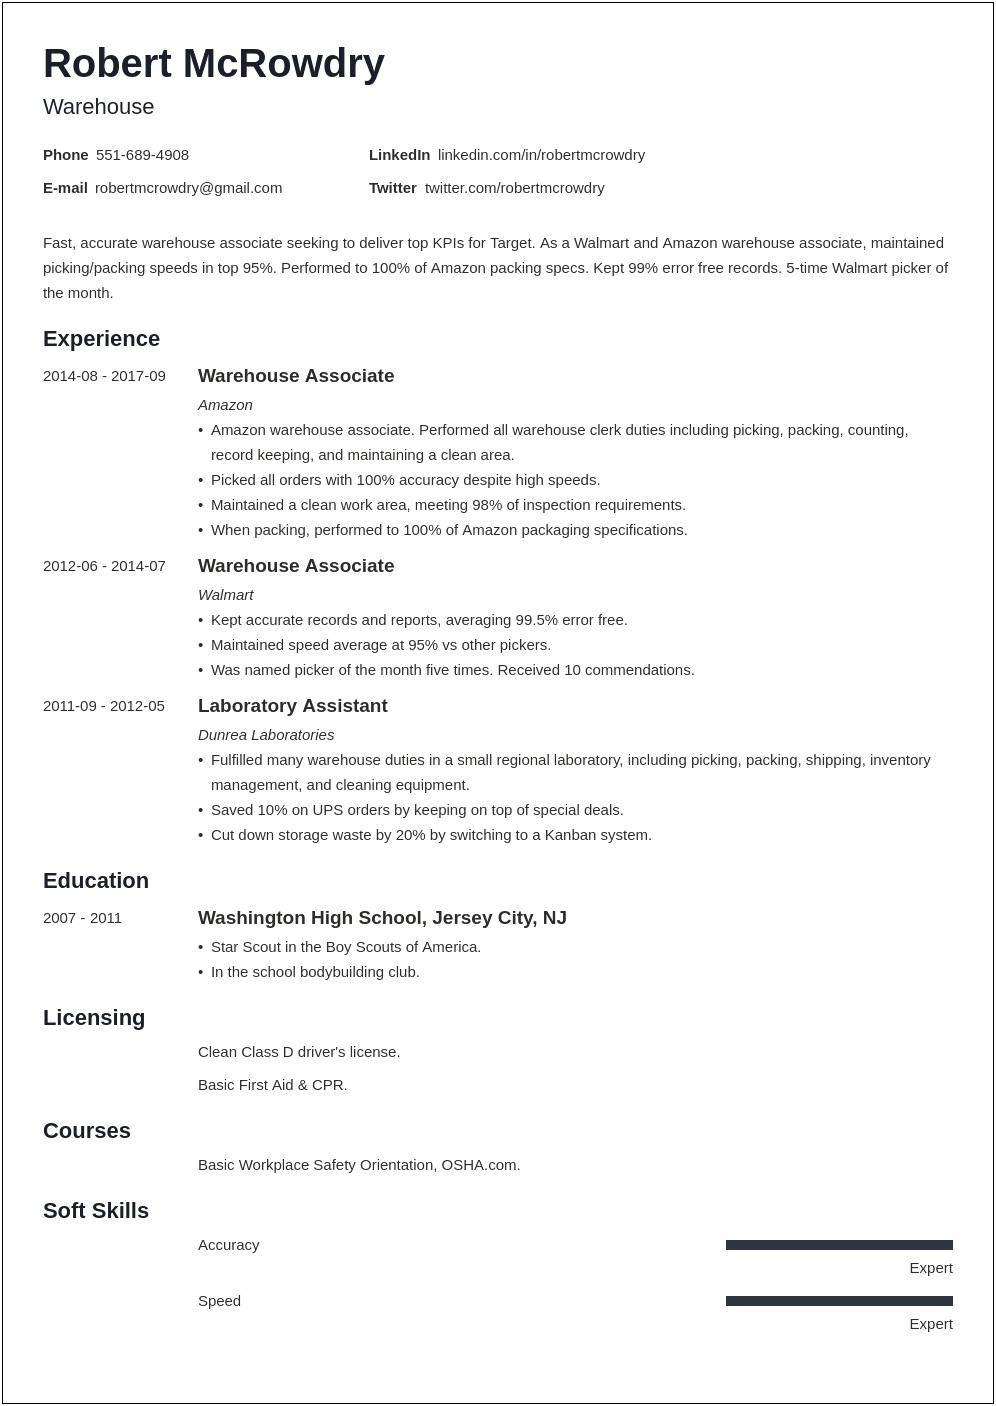 Resume Description For Picking And Packing